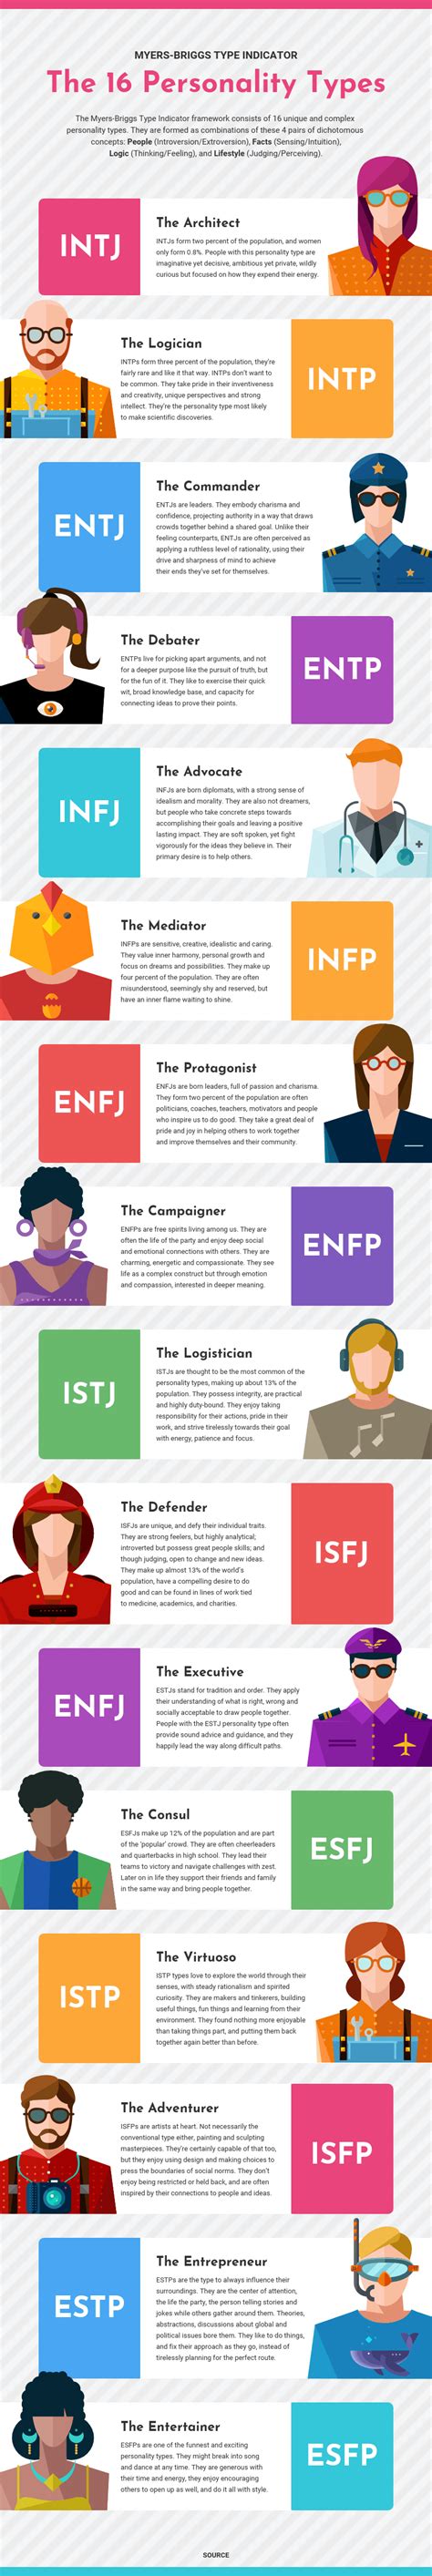 Myers Briggs Personality Types Infographic Really Cool Chart But The